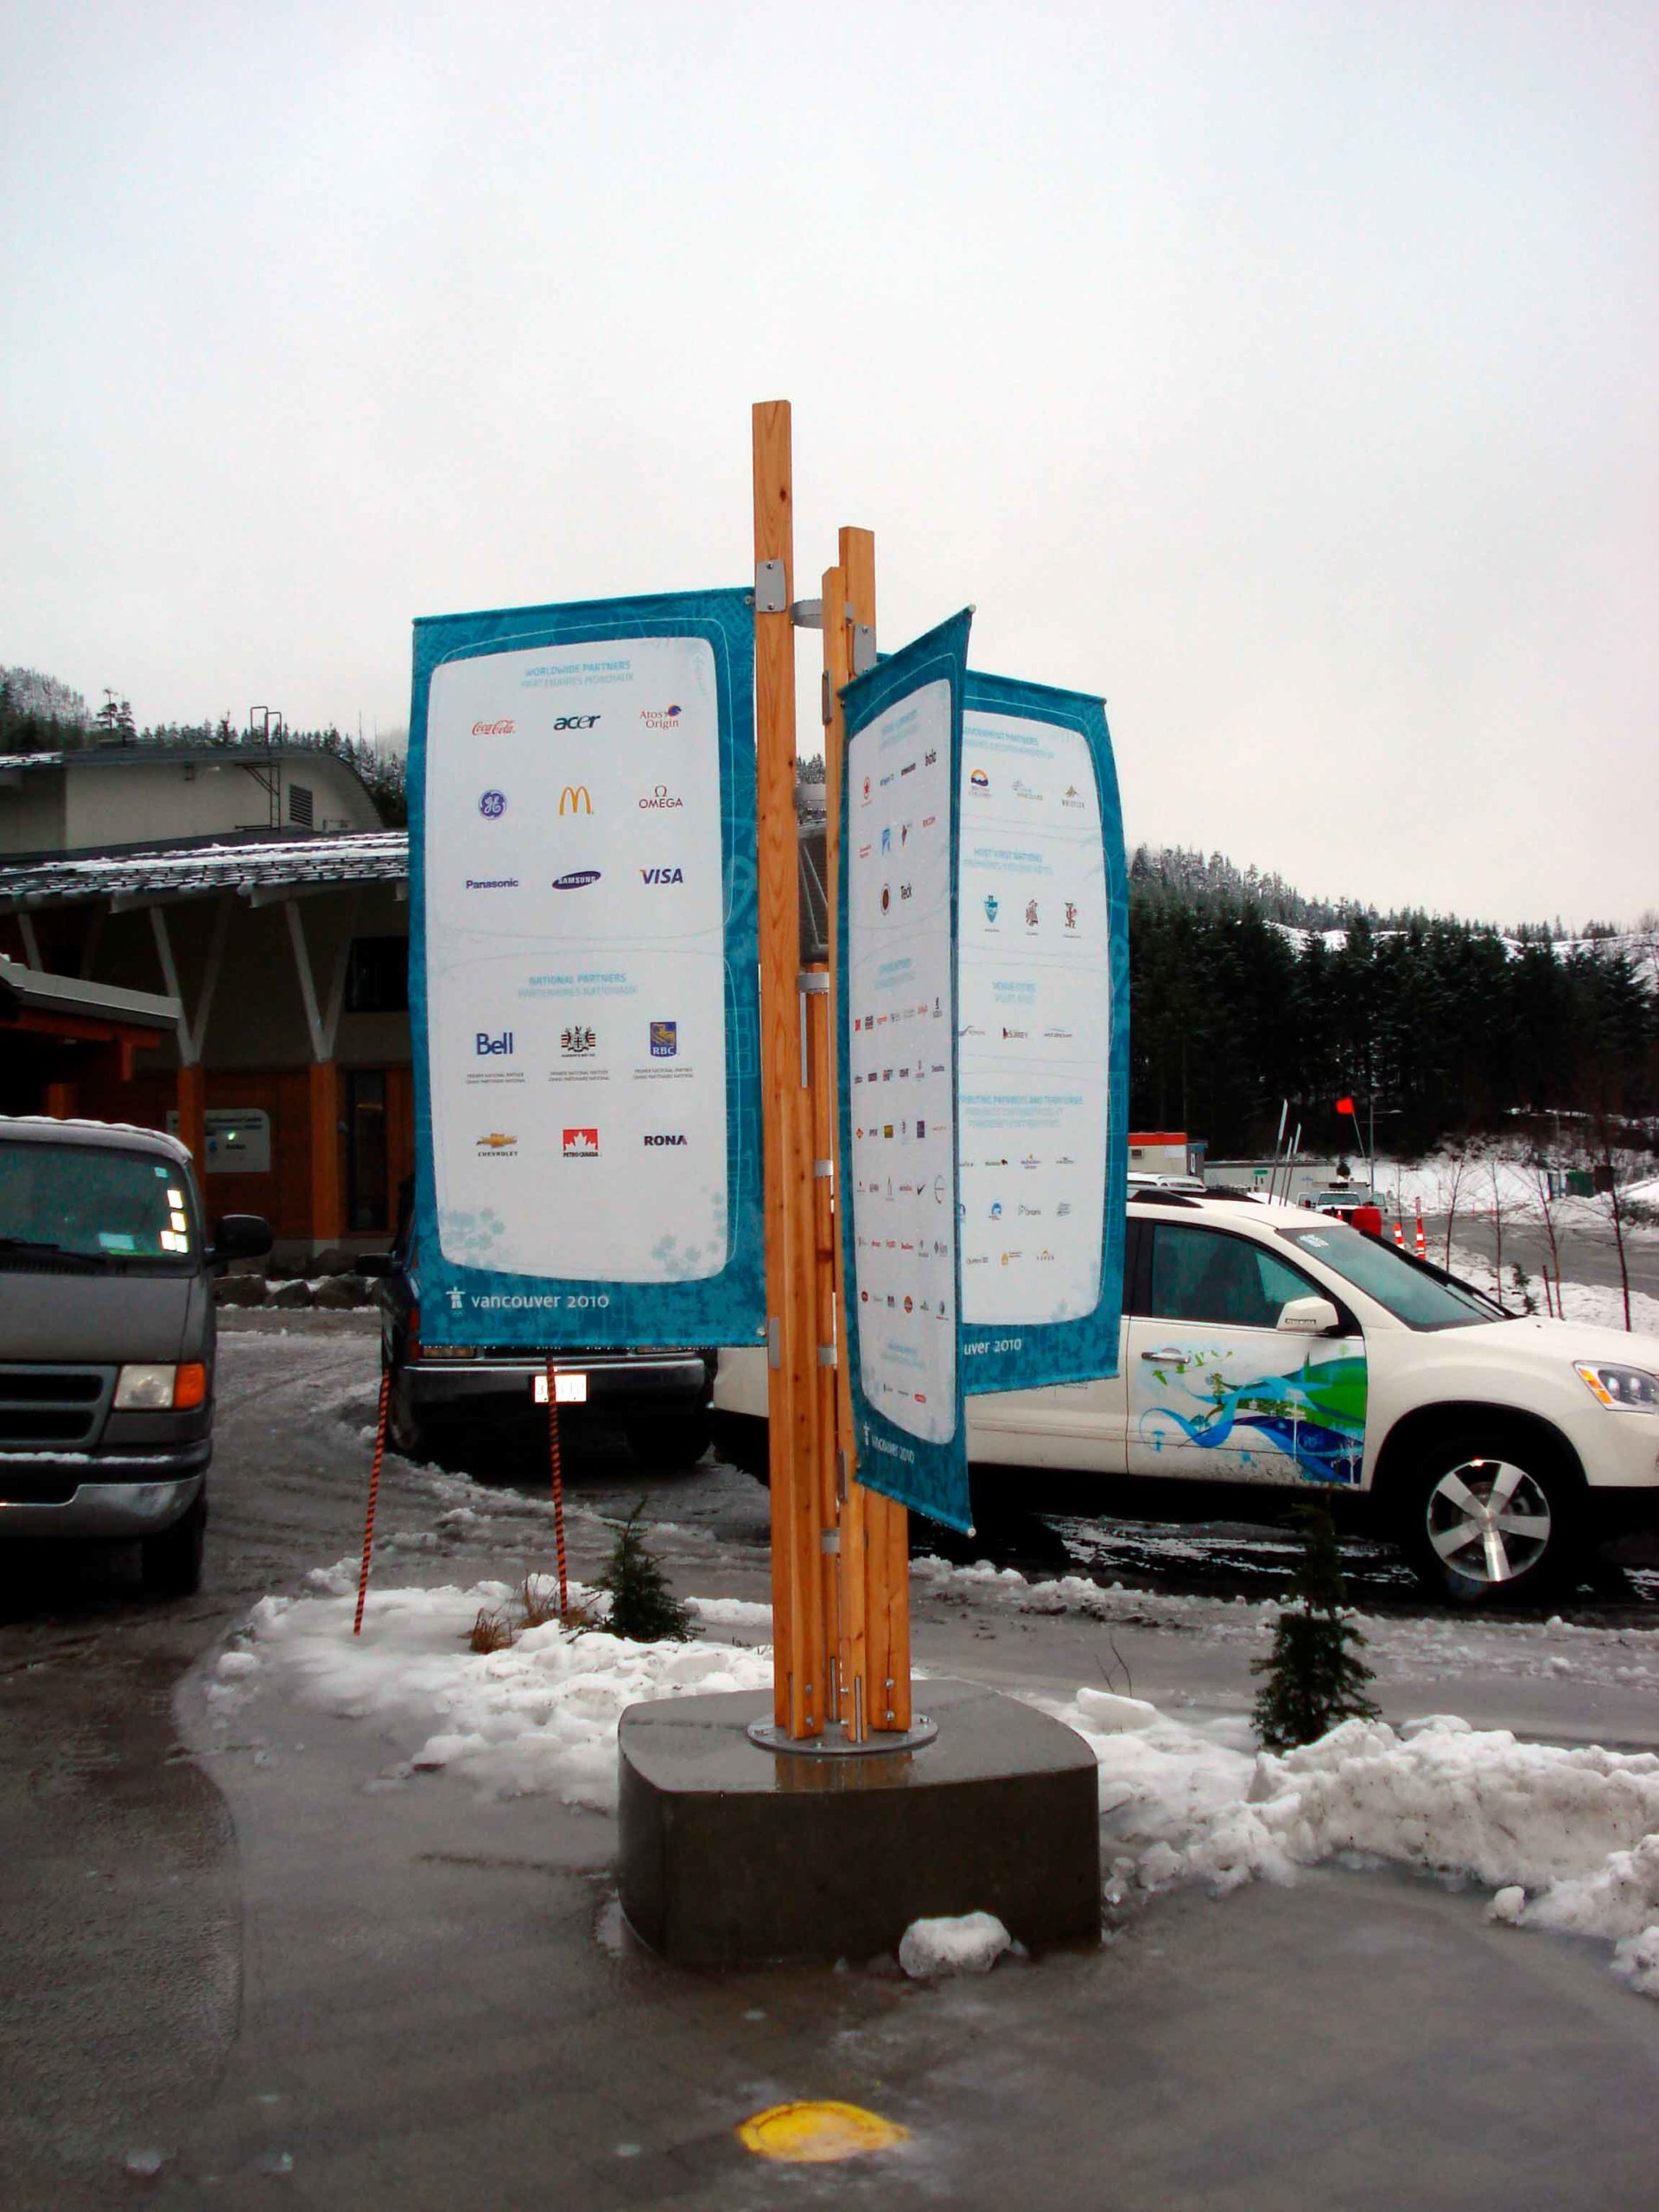 Outdoor Partner Recognition Tower for the Winter Olympics